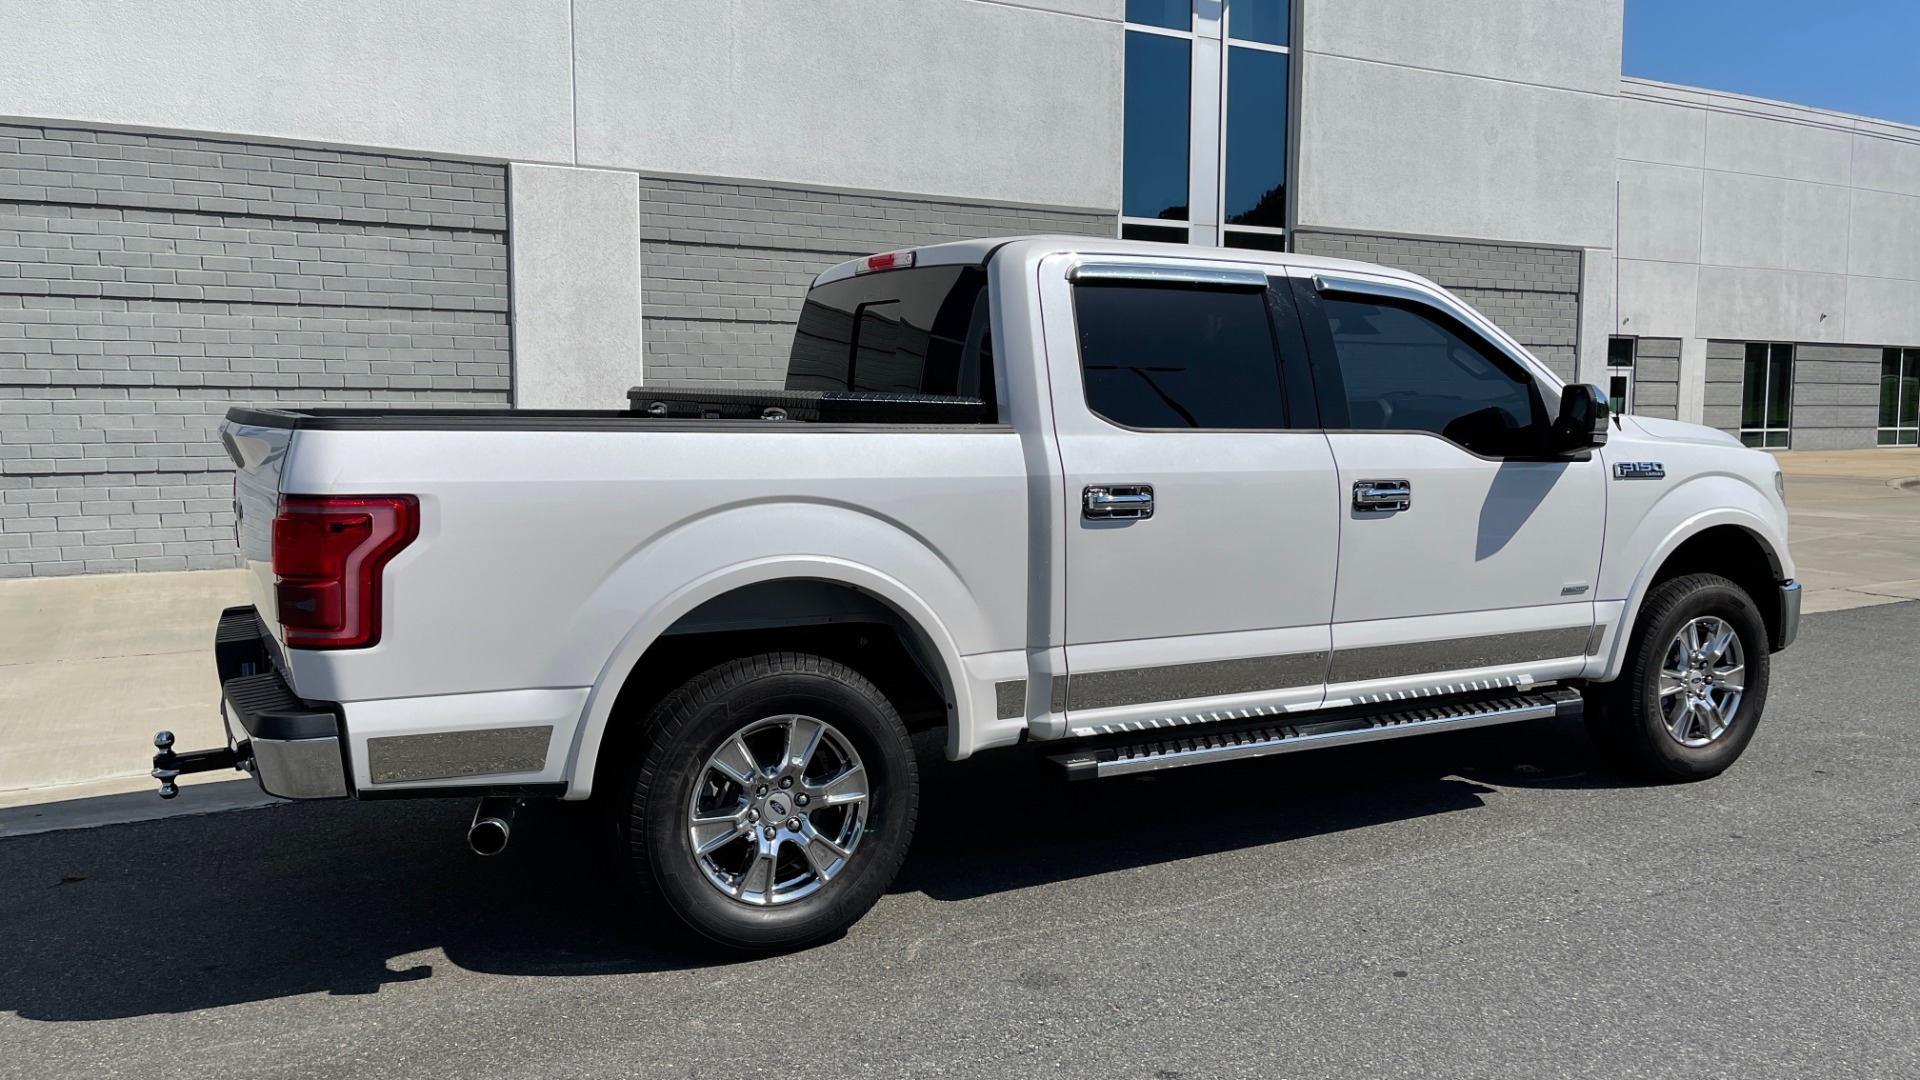 Used 2016 Ford F-150 LARIAT 4X4 / 3.5L V6 / 6-SPD AUTO / BLIS / SONY / NAV / REARVIEW for sale Sold at Formula Imports in Charlotte NC 28227 7